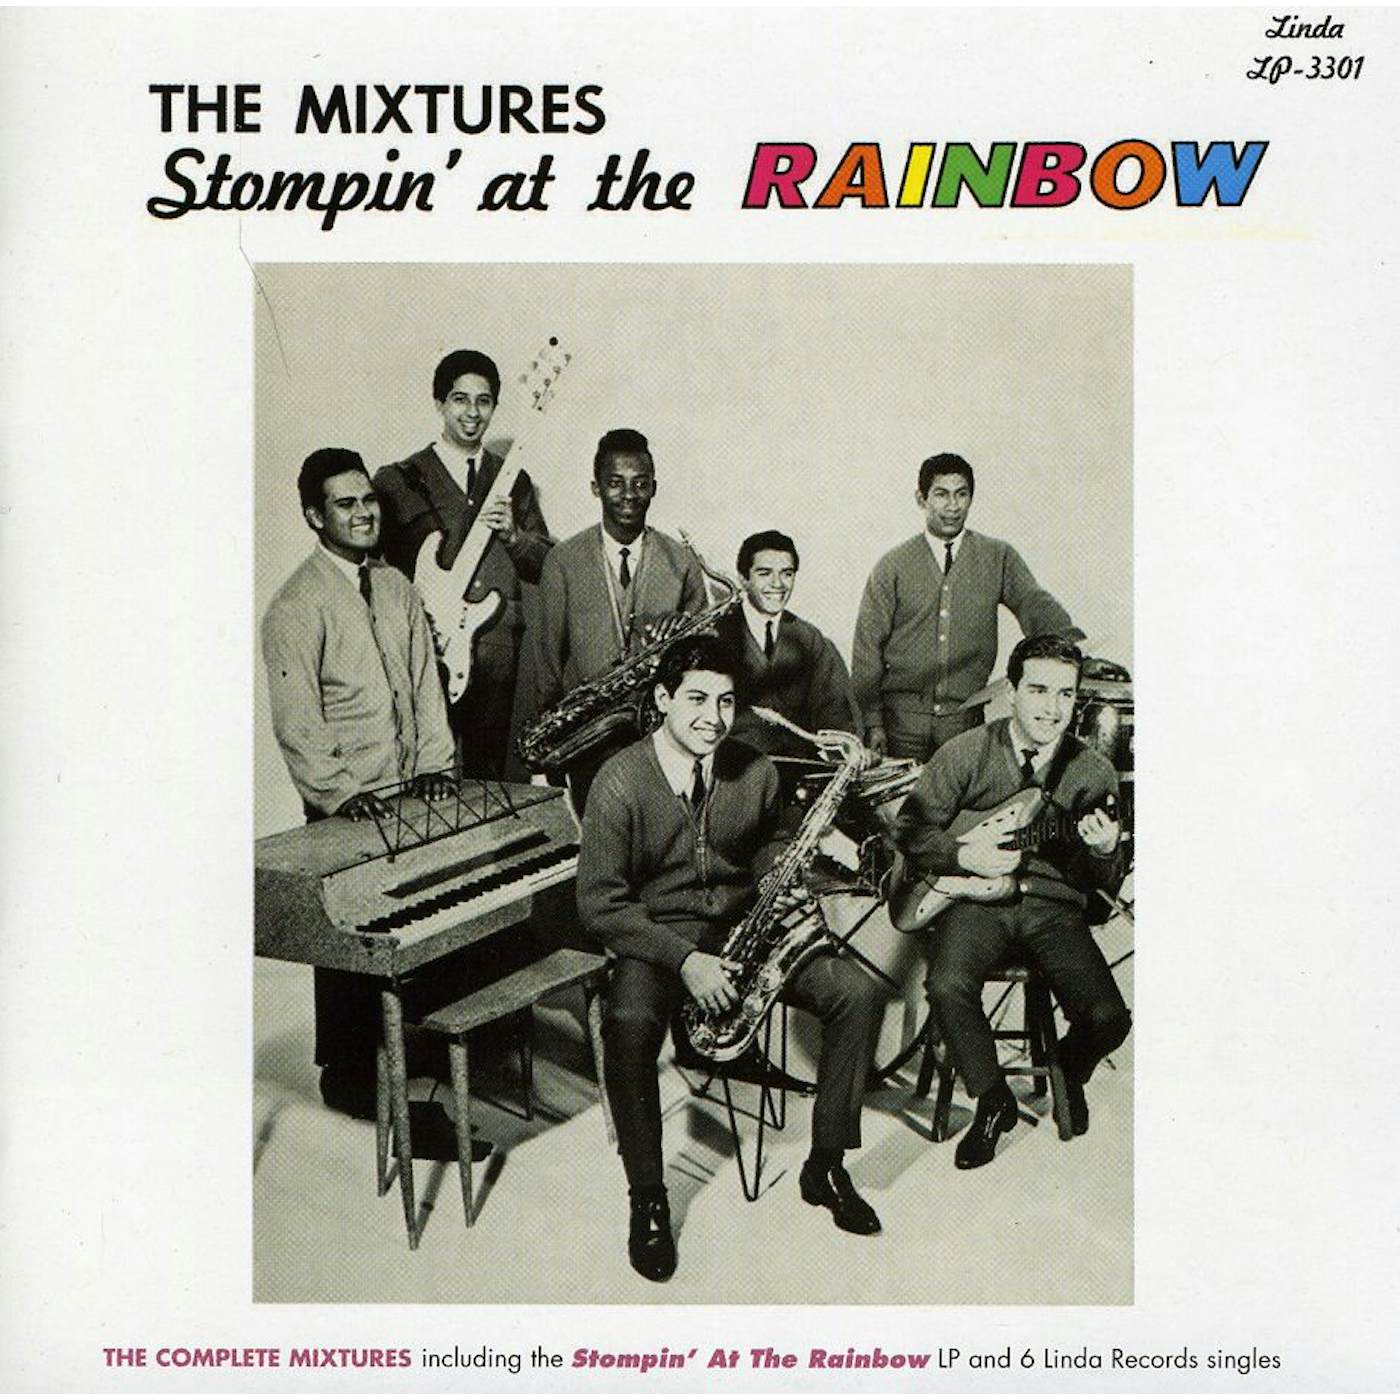 The Mixtures STOMPIN AT THE RAINBOW CD